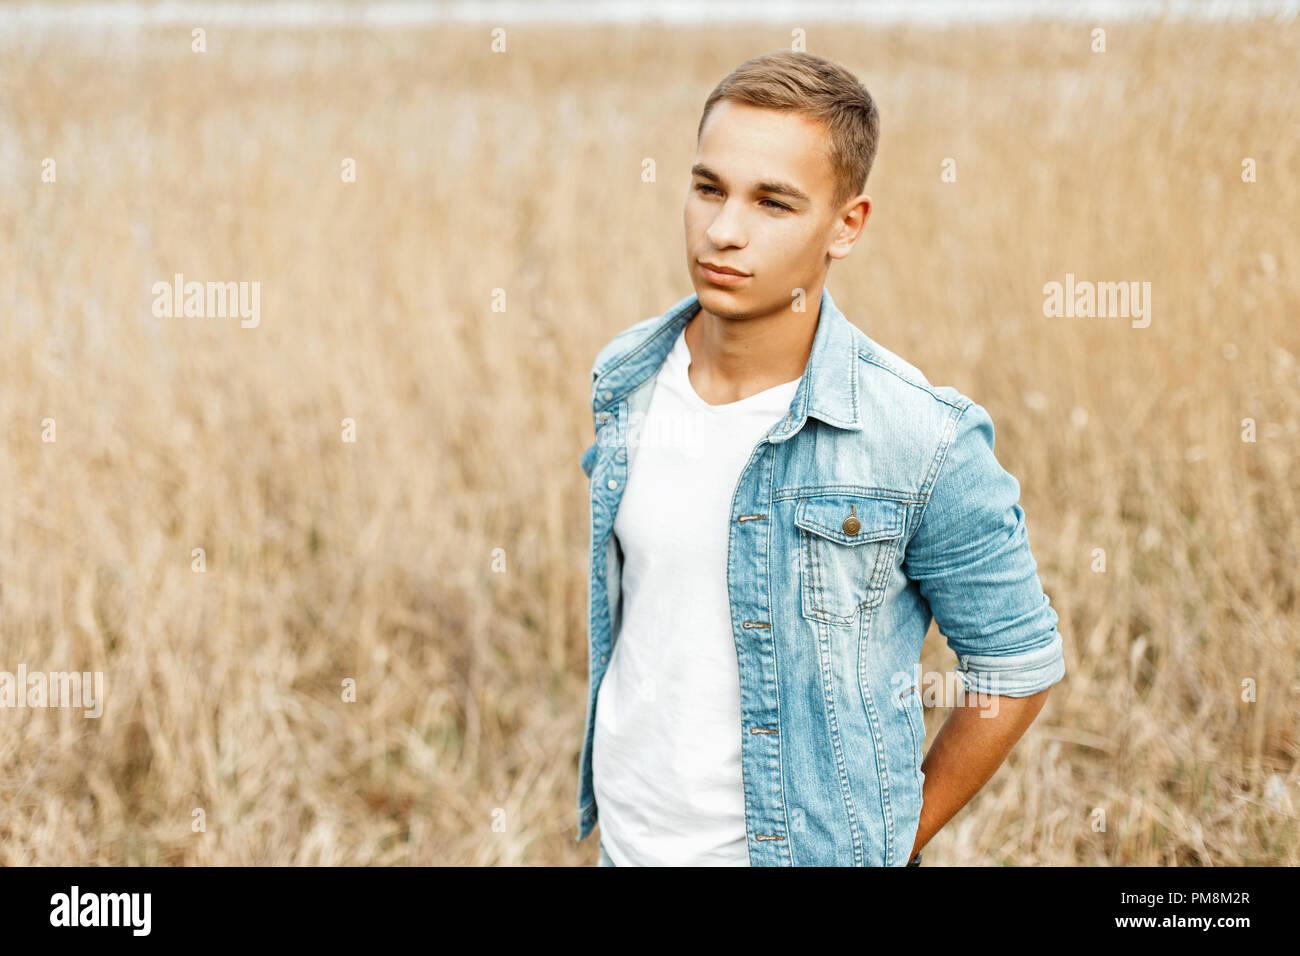 Handsome stylish young man in a jeans jacket and a white shirt in nature in a gray grass Stock Photo